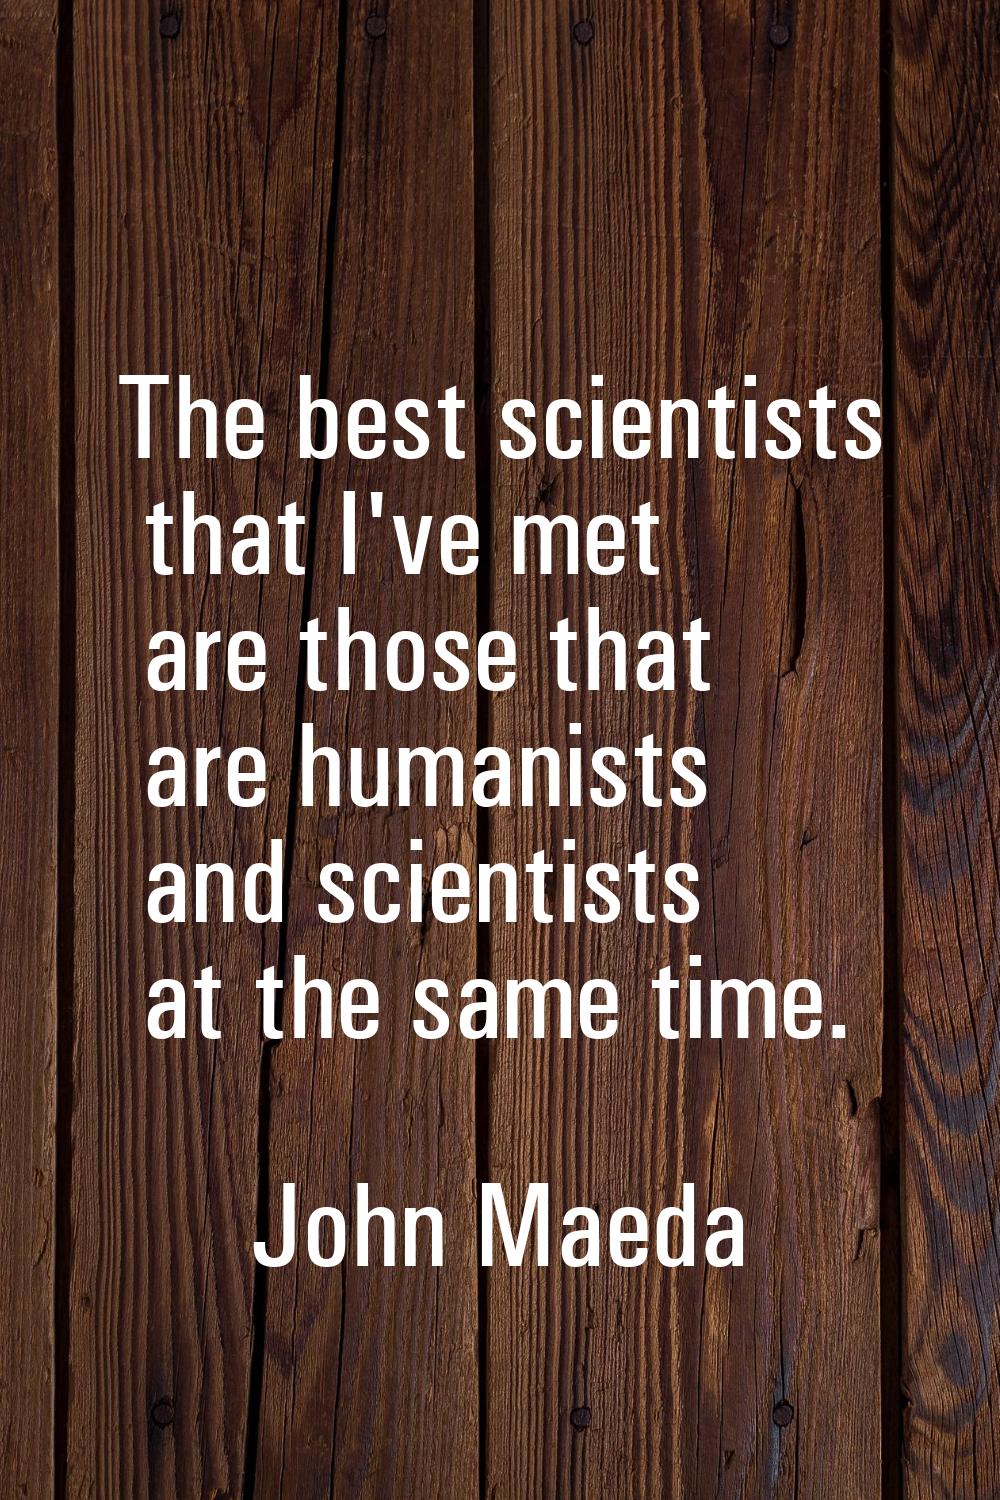 The best scientists that I've met are those that are humanists and scientists at the same time.